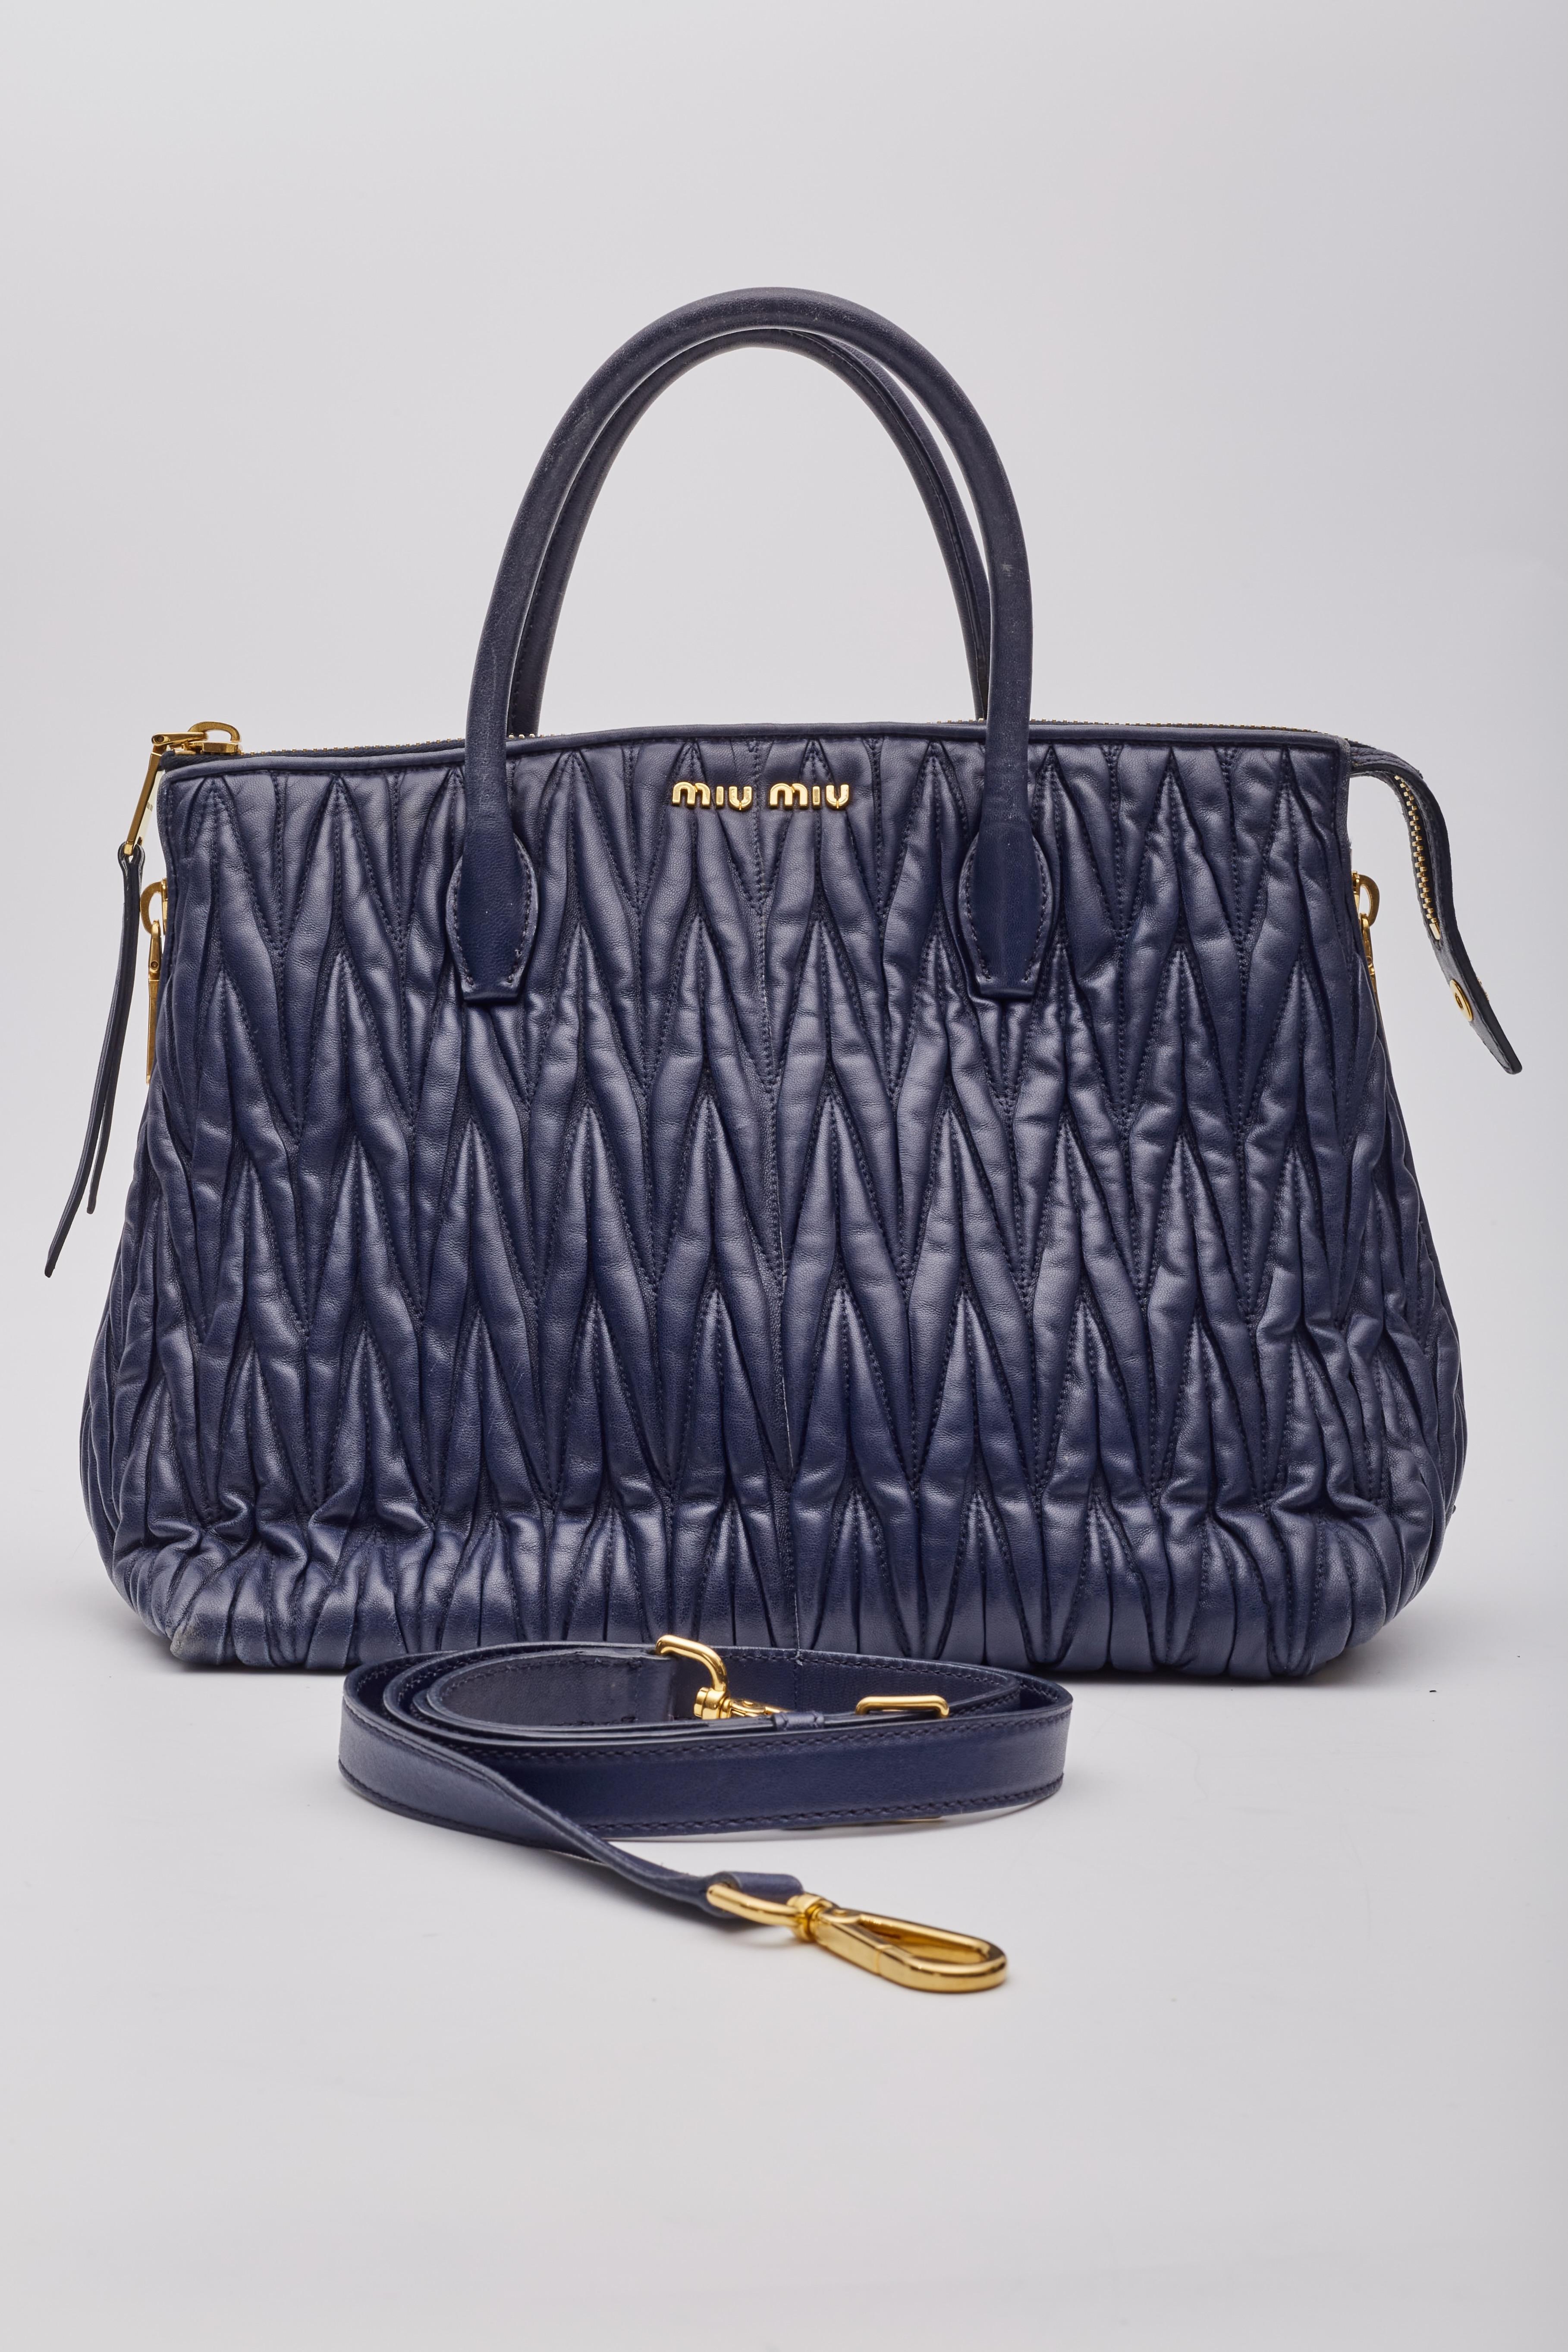 Miu Miu Matelasse Chevron Quilting Navy Nappa Leather Shoulder Bag In Good Condition For Sale In Montreal, Quebec